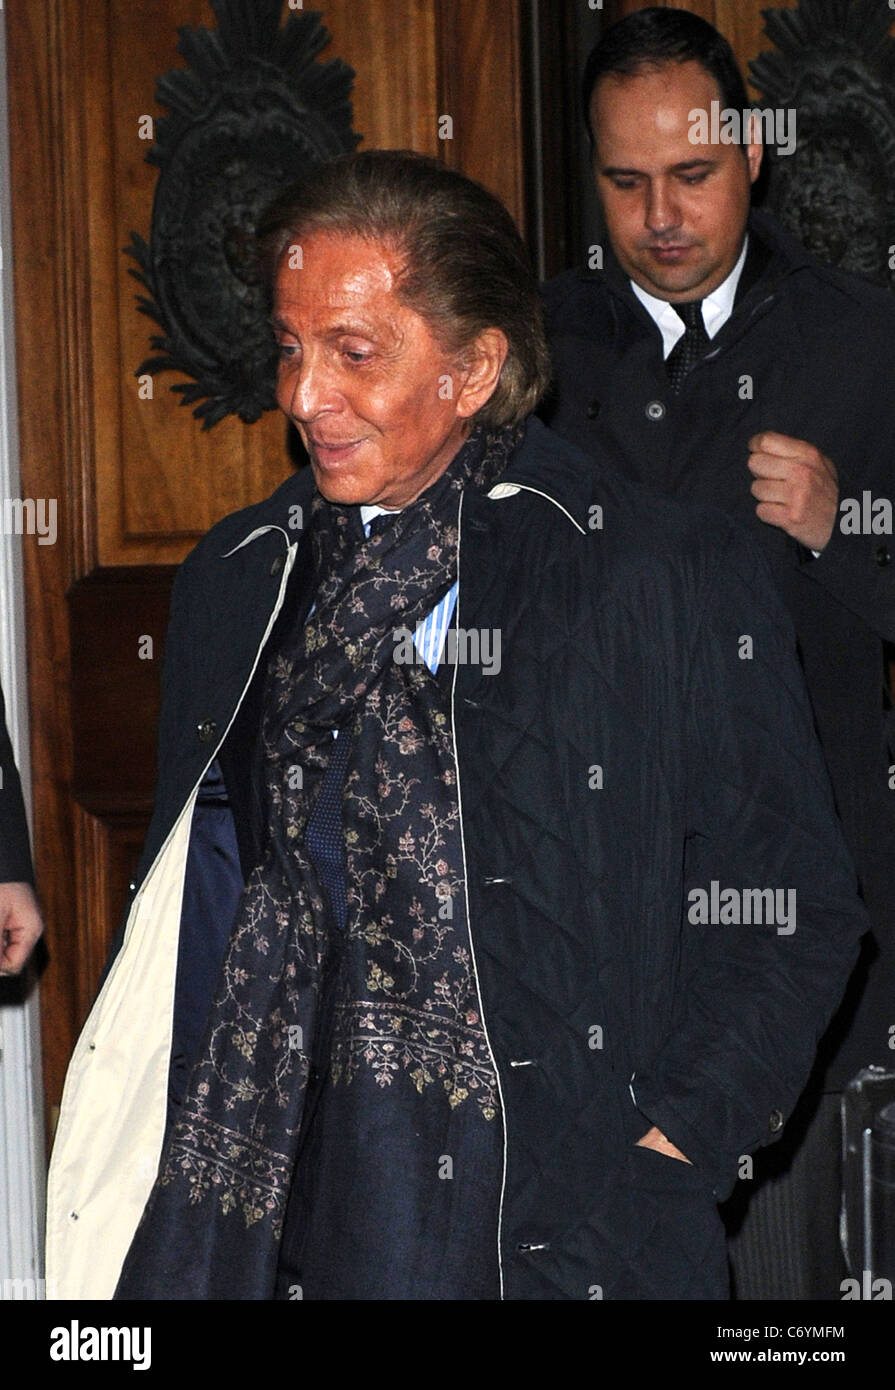 Valentino Garavani leaves an address in Chelsea after a private dinner  London, England - 31.03.10 Tony Clark Stock Photo - Alamy